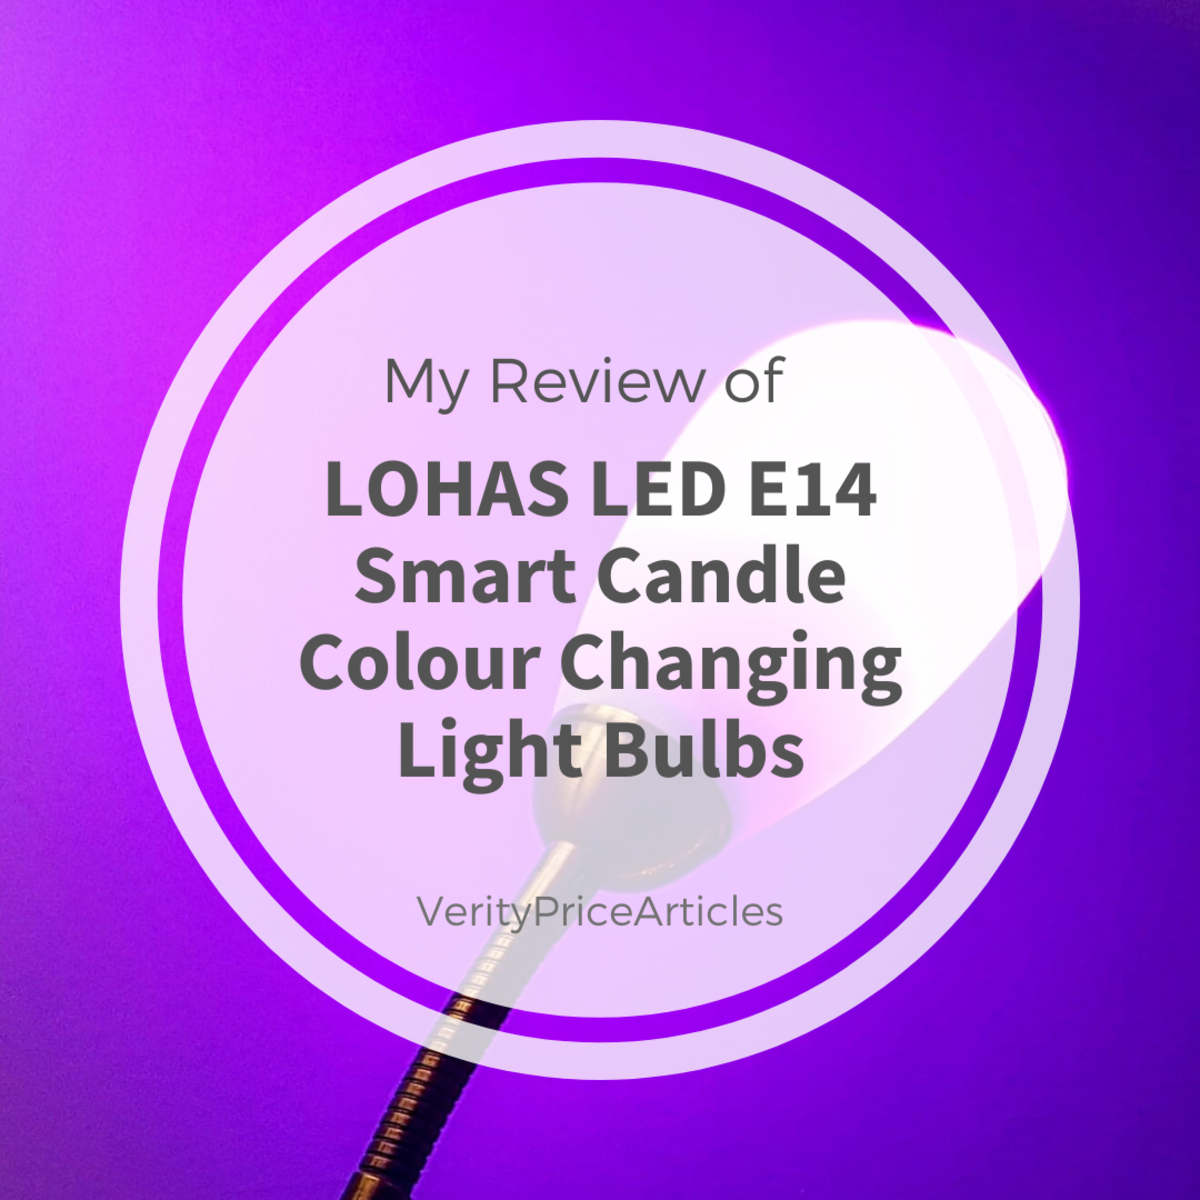 My honest and unsponsored review of LOHAS LED E14 Smart Candle Colour Changing Light Bulbs